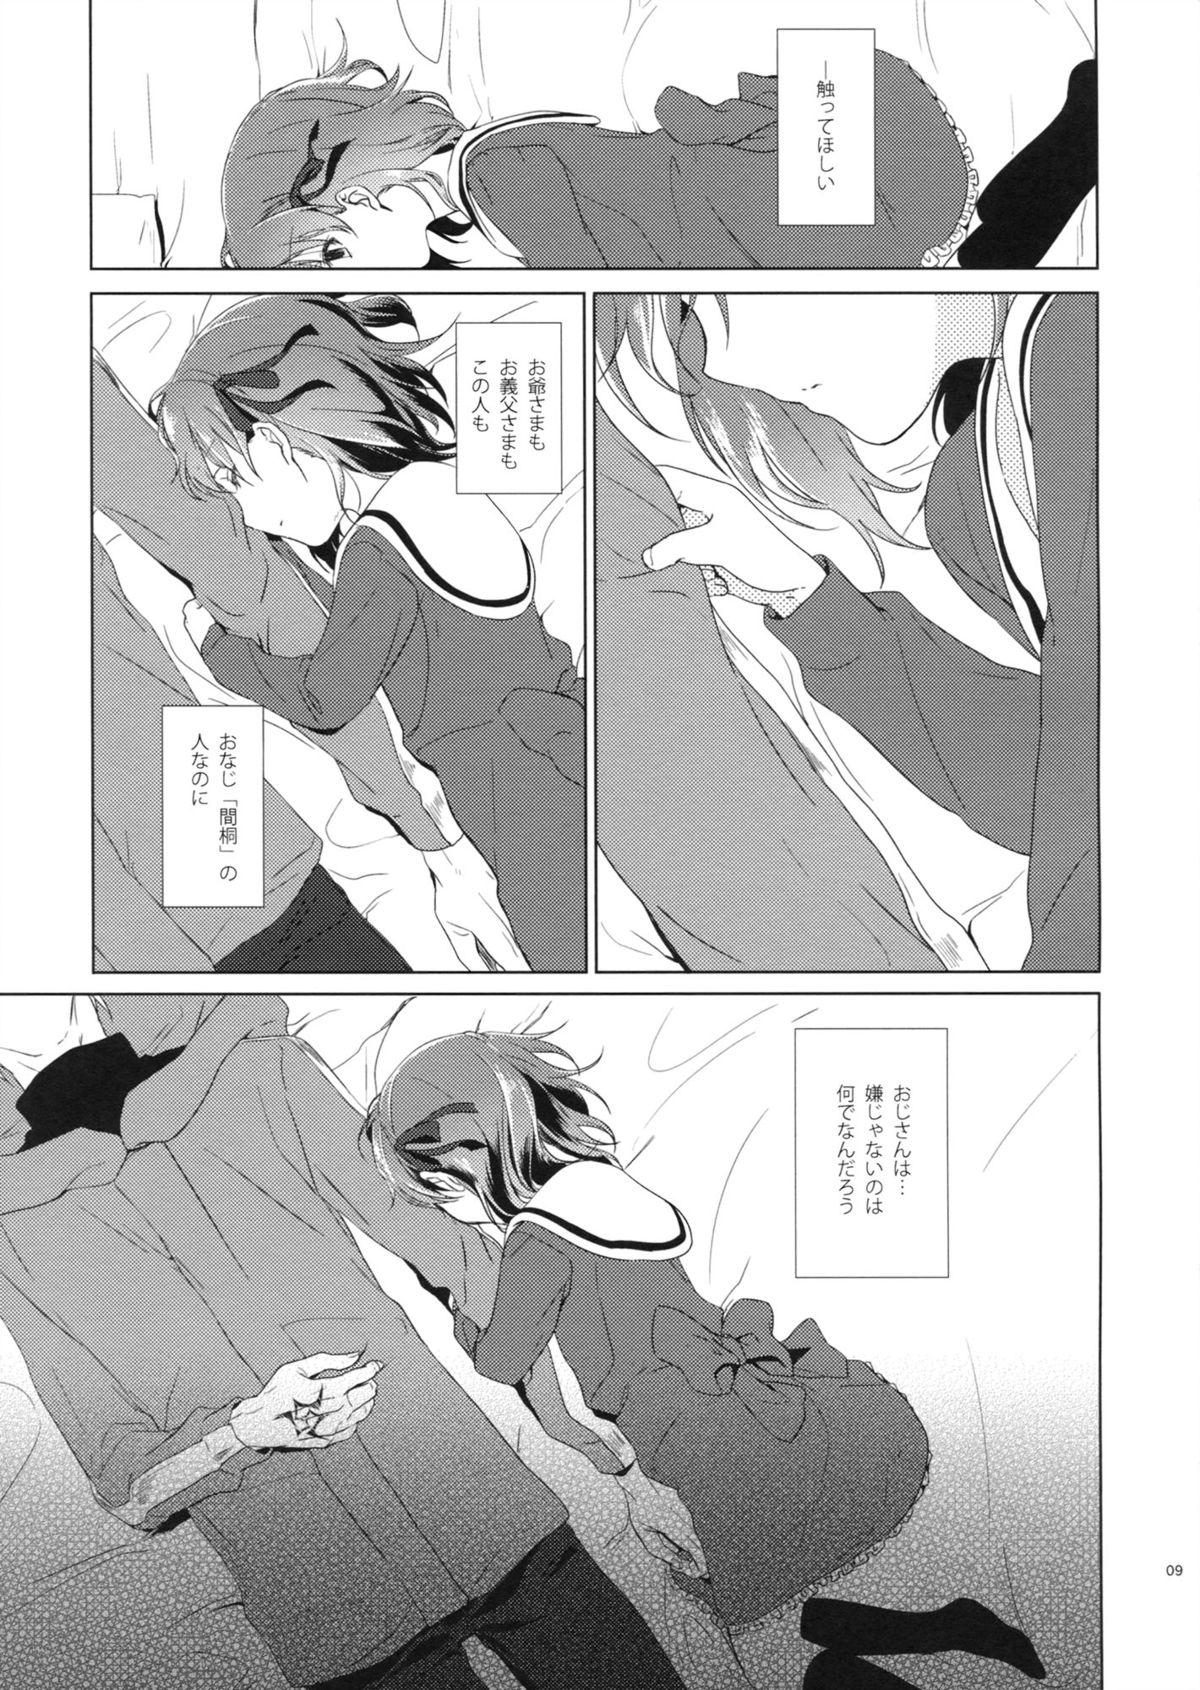 Oral UNDER MY SKIN - Fate zero Camshow - Page 8